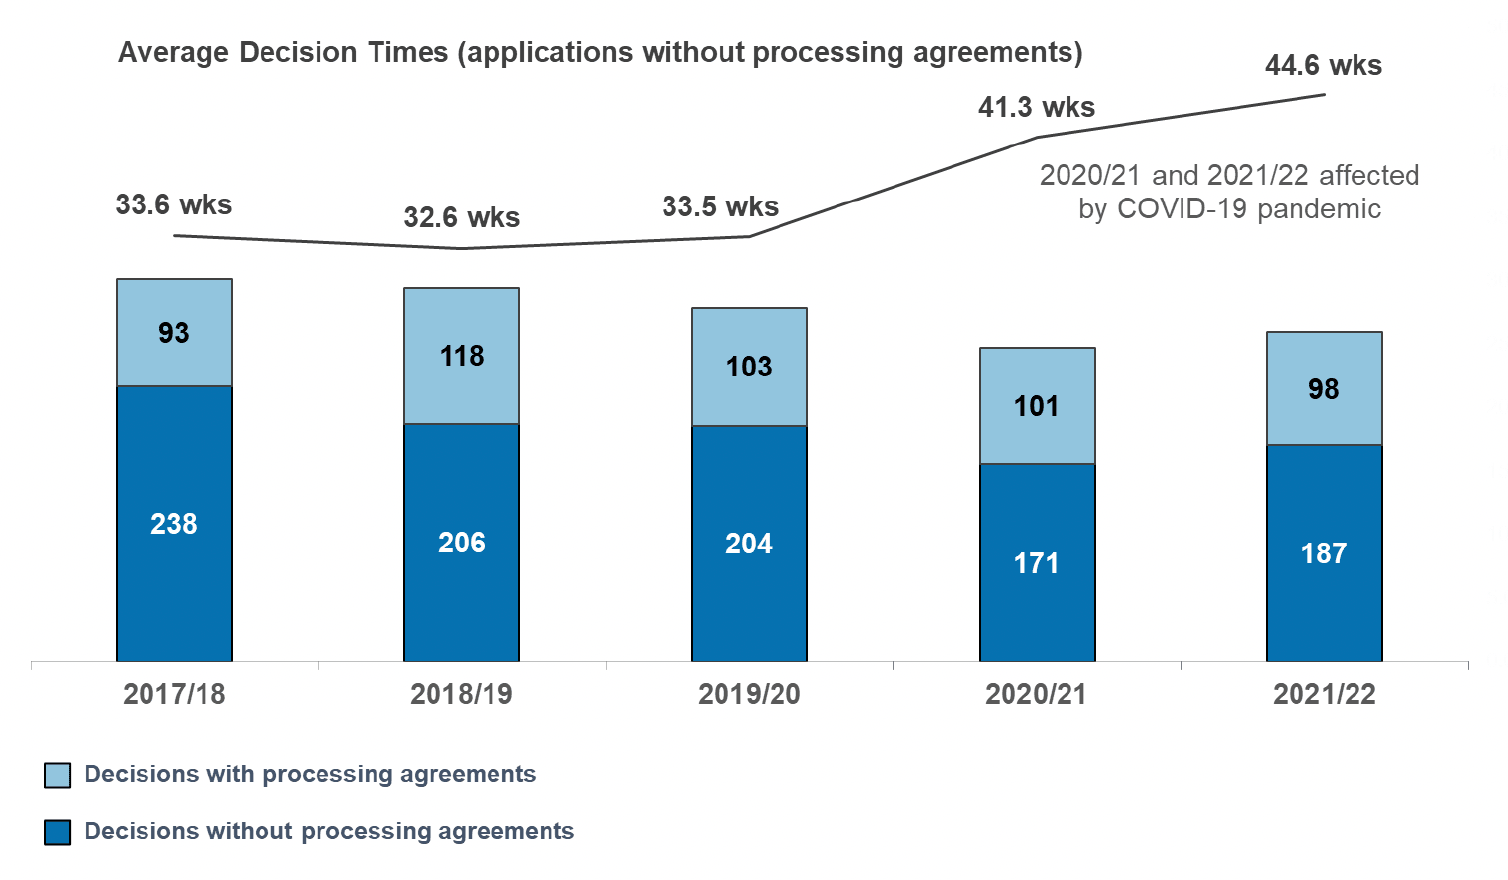 A stacked column chart showing number of major applications decided since 2017/18. Also a line chart of average decision times for major applications without processing agreements. Numbers of applications increased slightly in 2021/22, but the longer term trend is declining numbers. Average decision times rose in 2020/21 and again in 2021/22 to 44.6 weeks, 11 weeks longer than 2019/20.